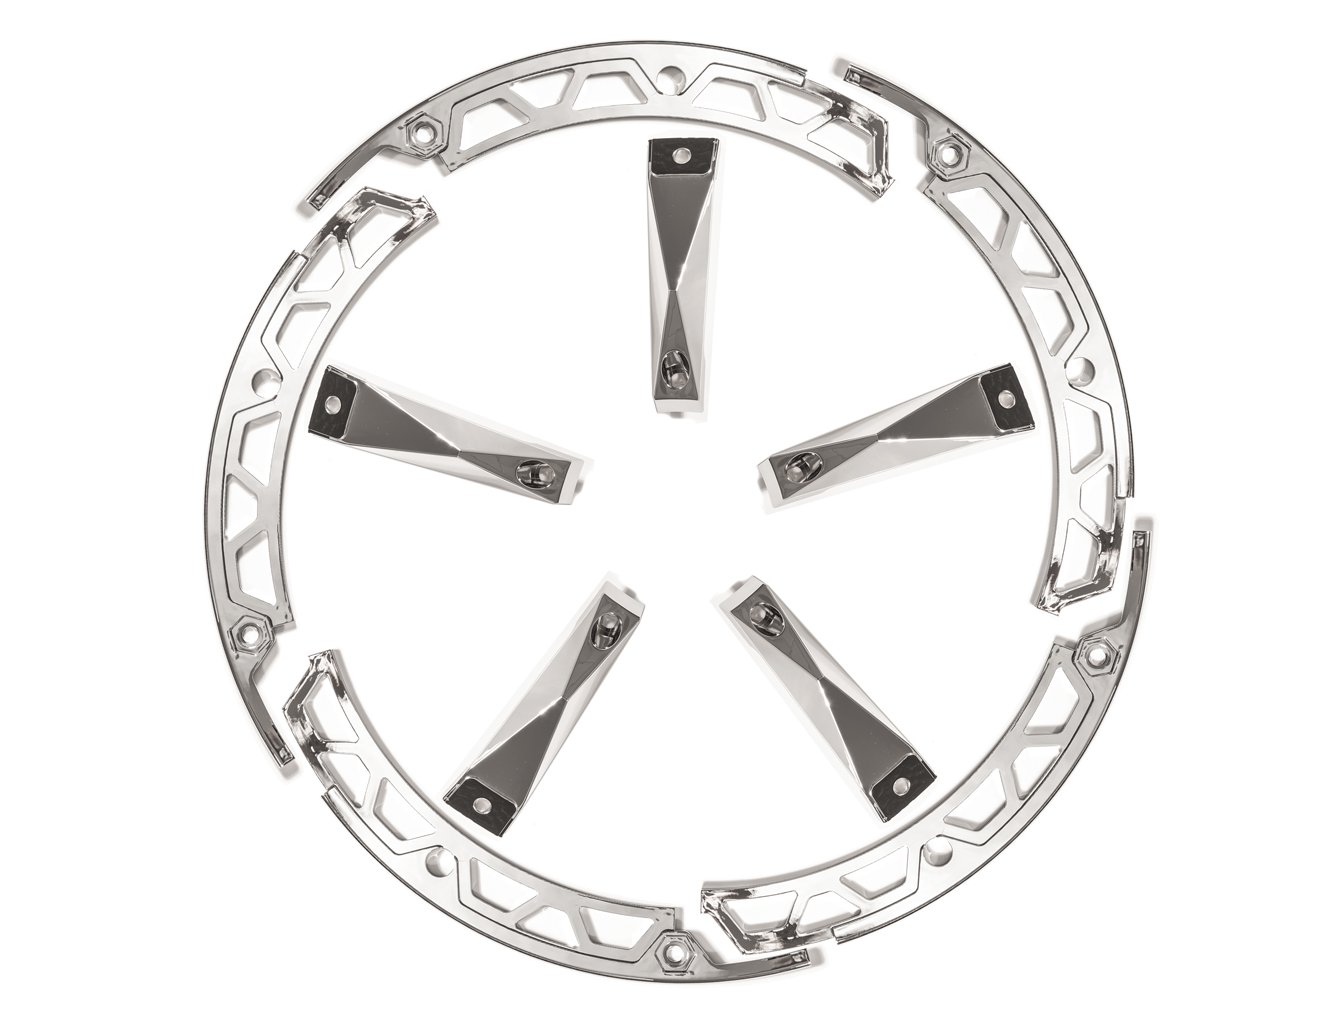 GD04A-Series Wheel Insert, Fits Wheel Size: 17 x 9 in., Direction: Non-Directional [Chrome]